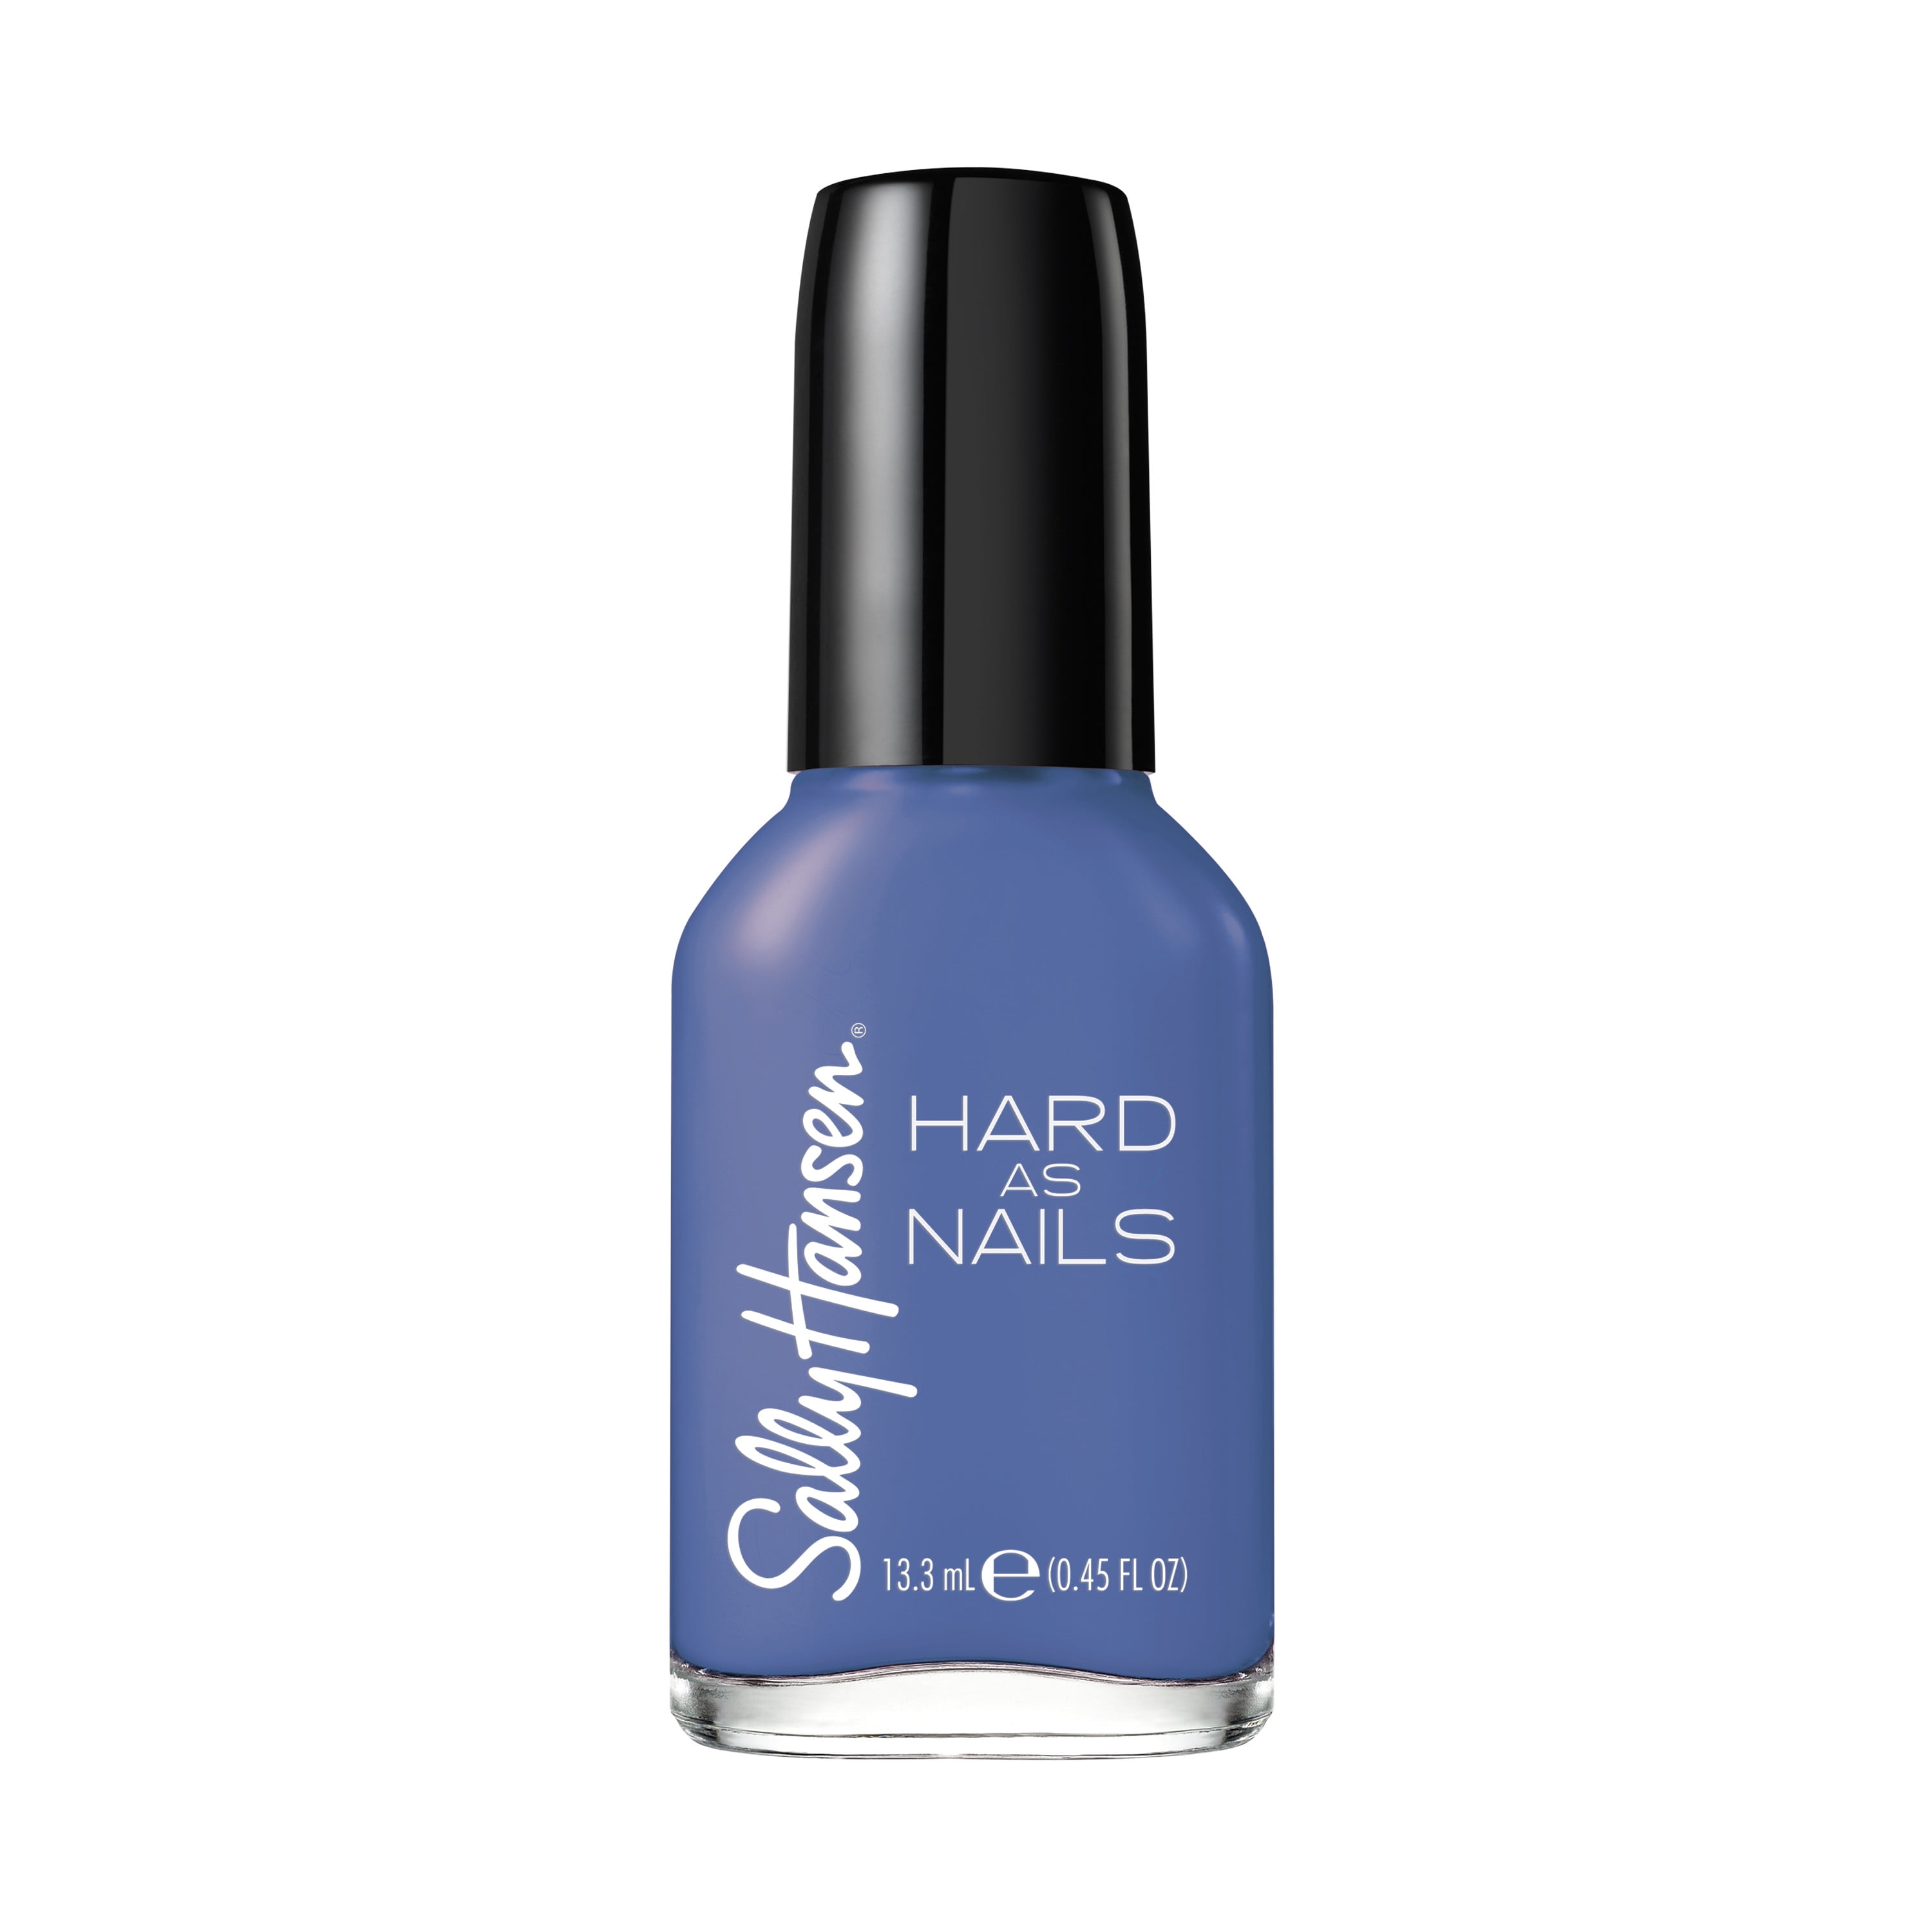 Buy Sally Hansen Hard As Nails Hard As Wraps Nail Harderner - Tint - 0.4 oz  Online at Low Prices in India - Amazon.in